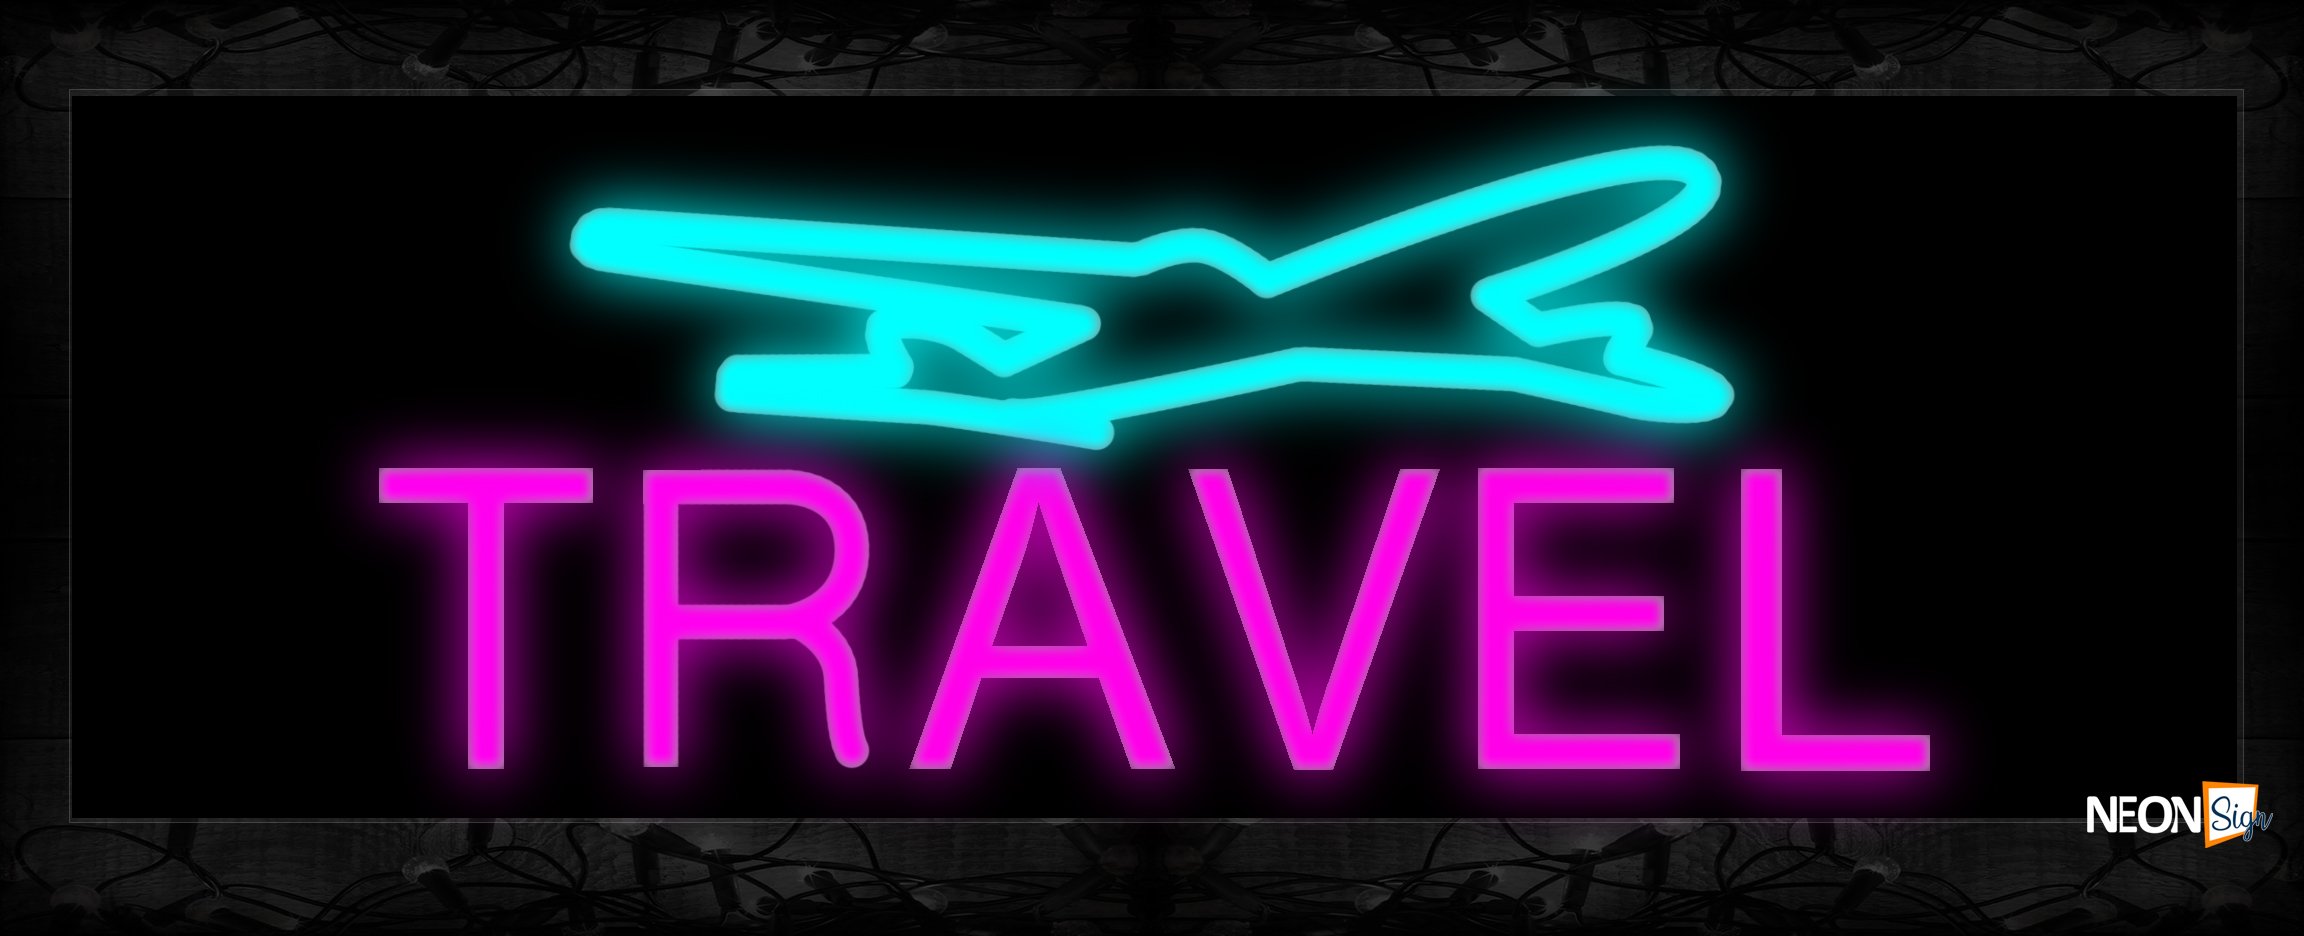 Image of Travel In Pink And Plane Logo Neon Sign